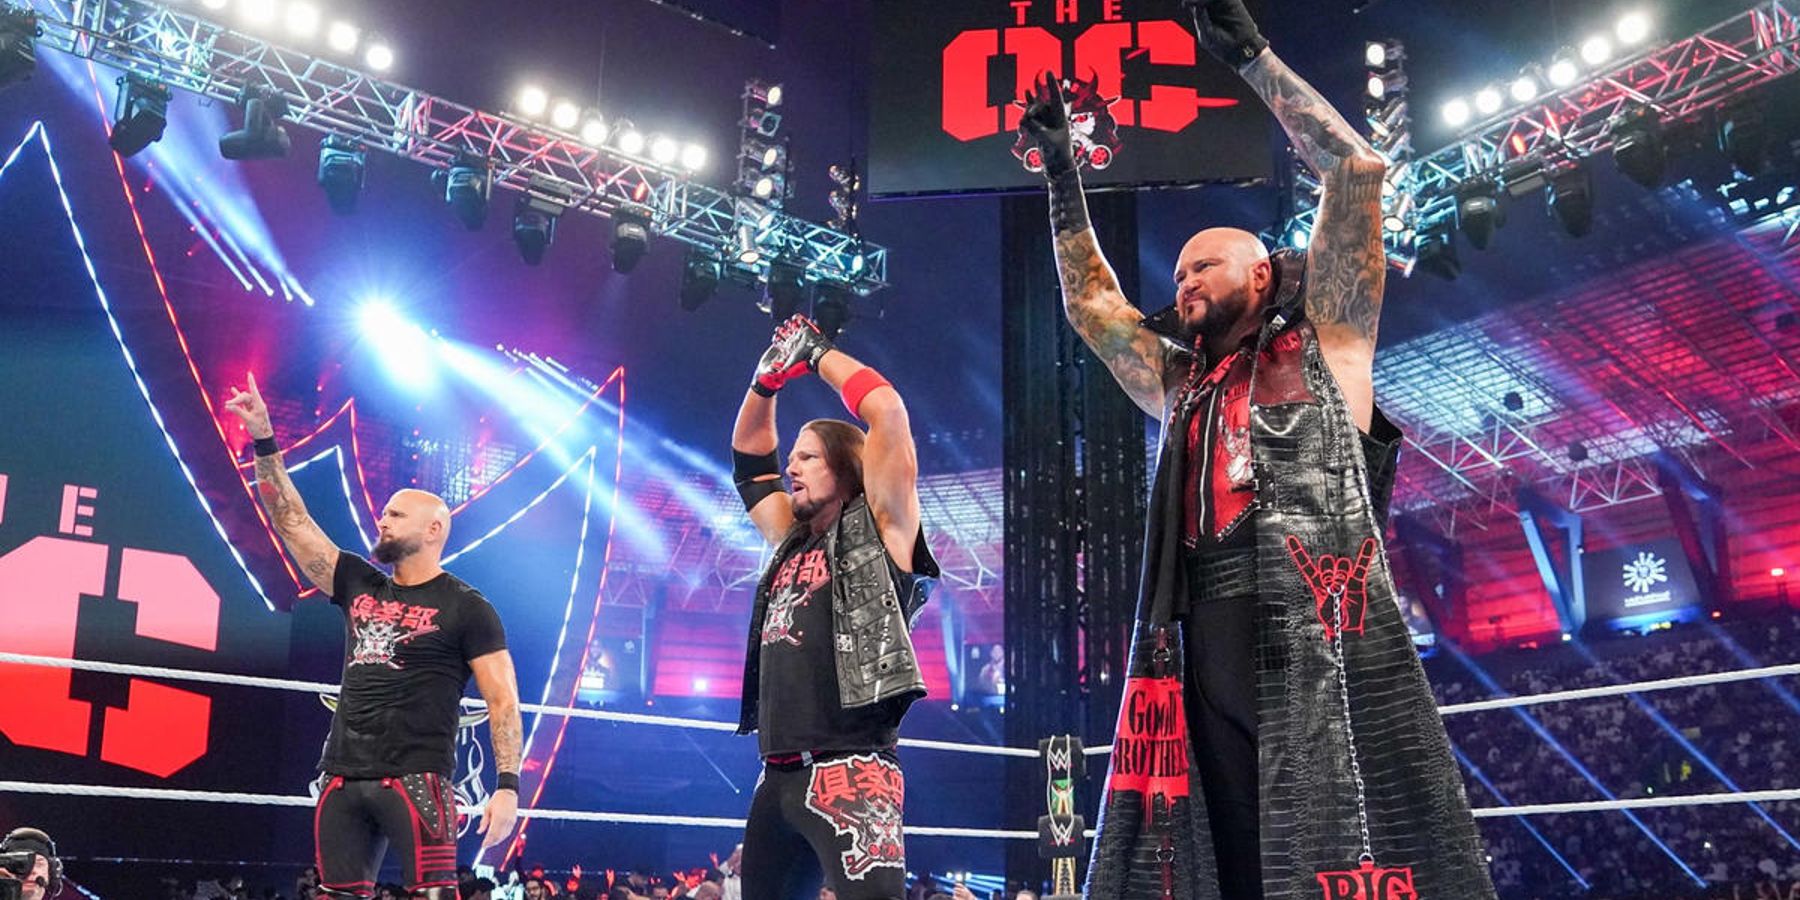 The OC—AJ Styles, Karl Anderson and Luke Gallows—make their entrance during WWE's Crown Jewel event in 2022.